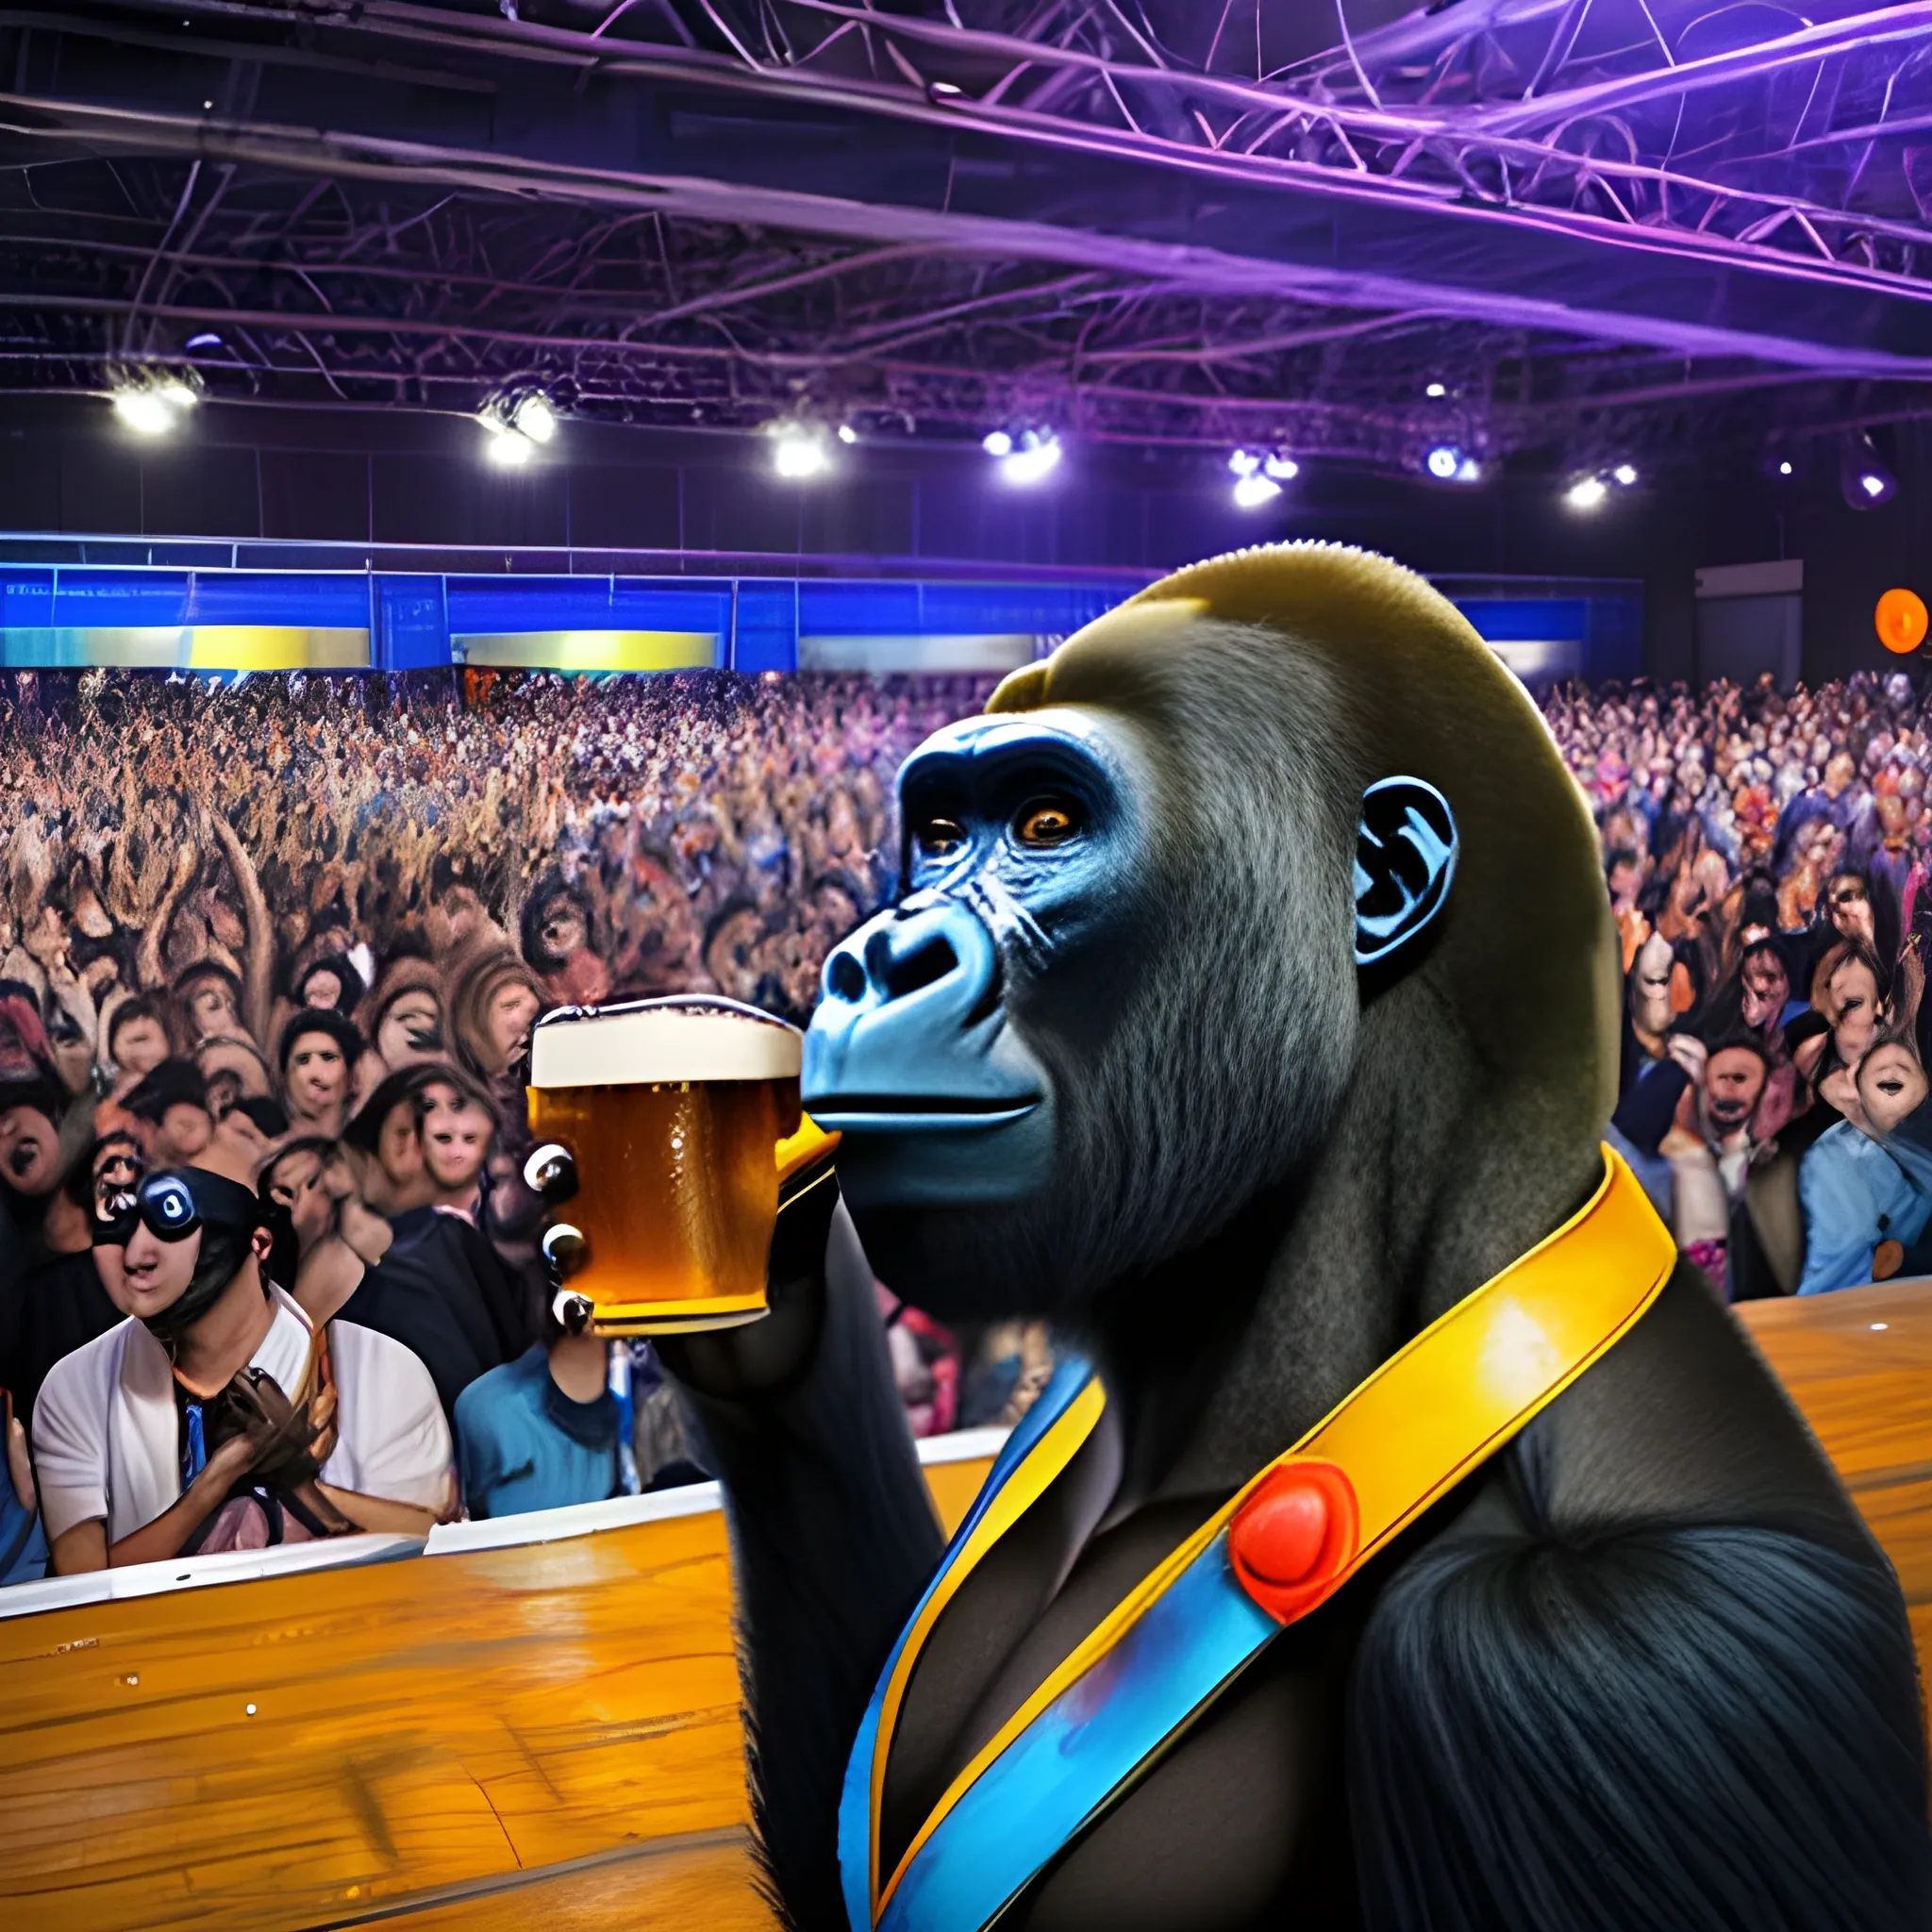 Gorilla Drinking beer, a packed show, runway full of people, set of speakers playing, blue lights, Cartoon, baile funk